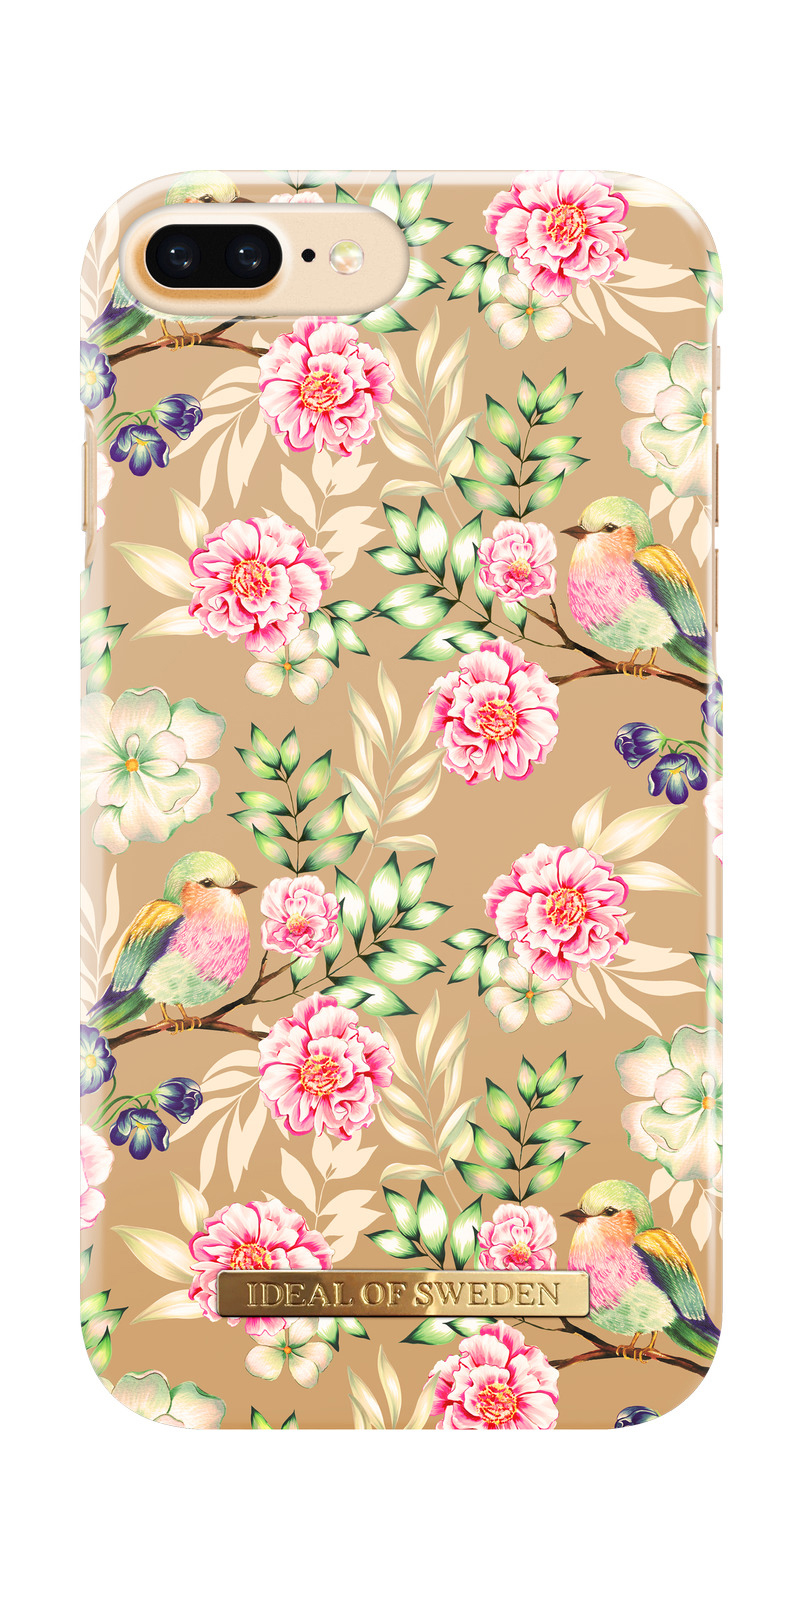 Birds Champagne Plus, Fashion, IDEAL Plus Apple, OF Plus, 6 ,iPhone 7 iPhone Backcover, 8 iPhone SWEDEN